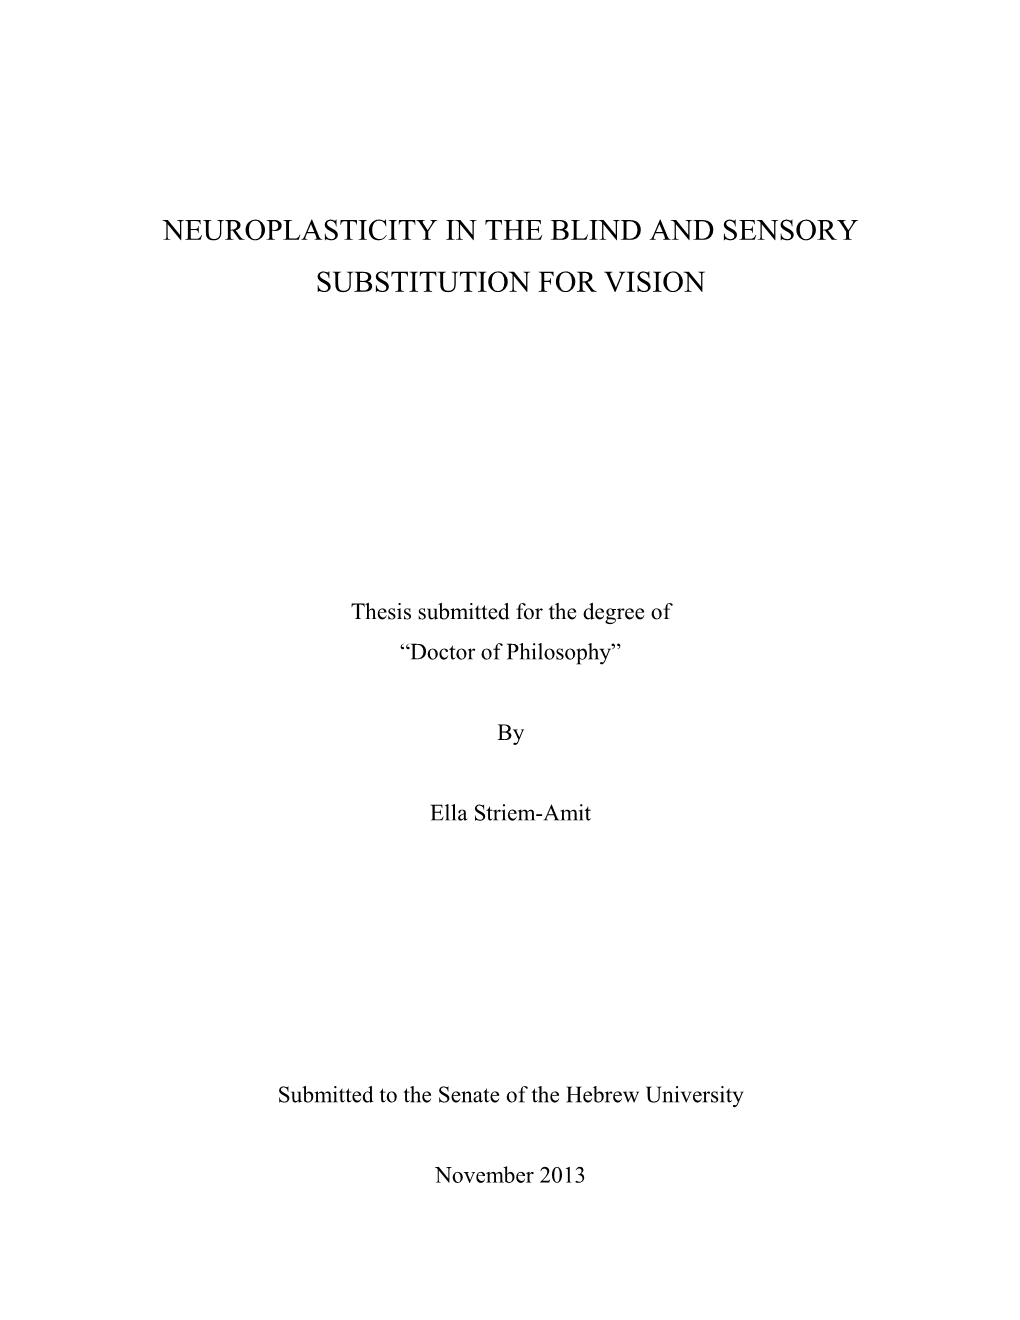 Neuroplasticity in the Blind and Sensory Substitution for Vision